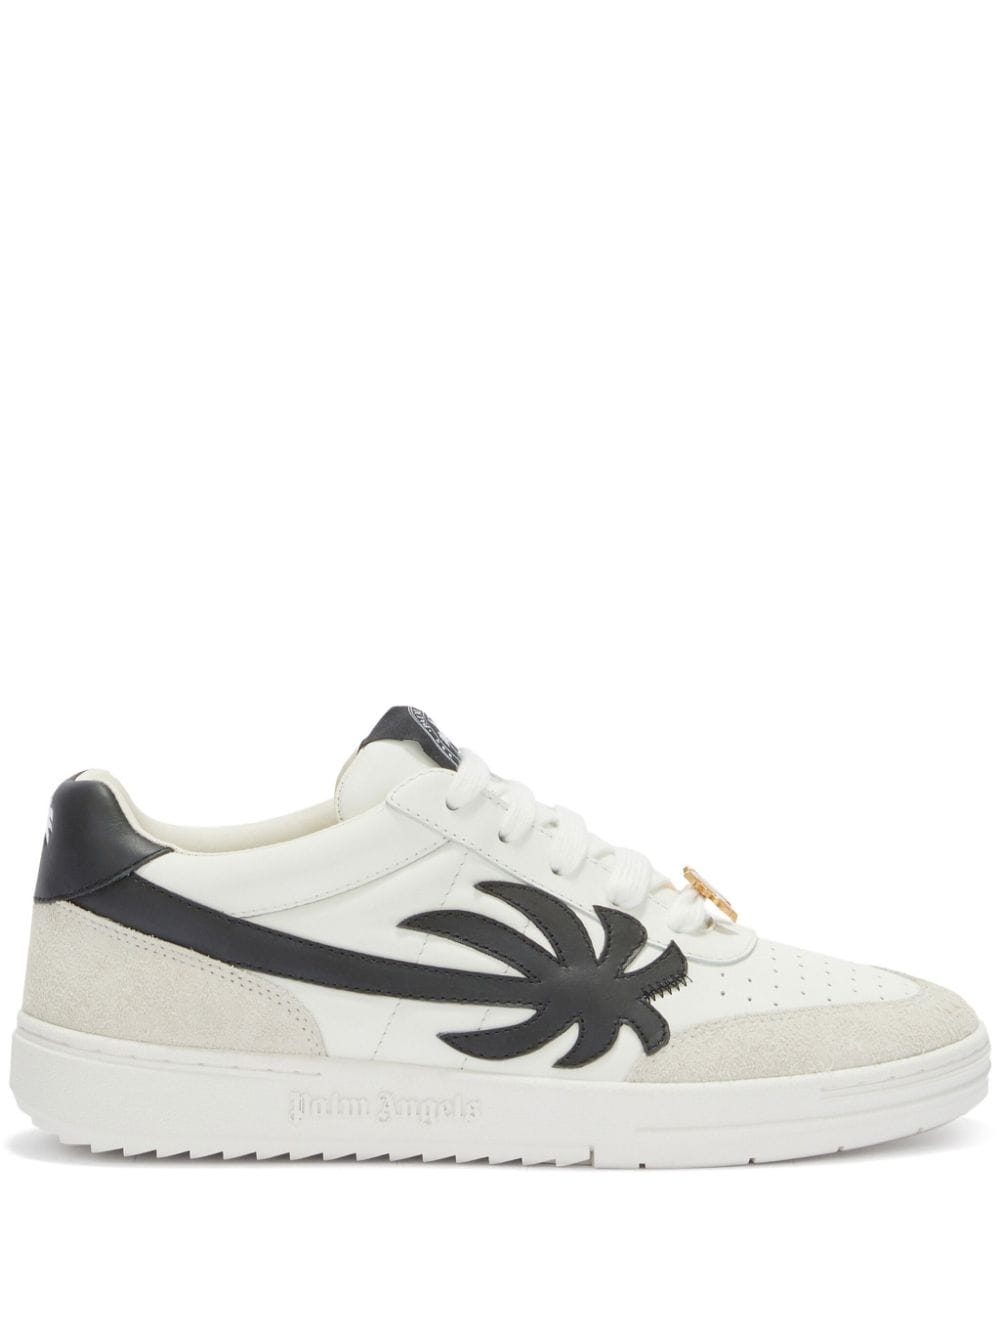 Palm Beach University sneakers<BR/><BR/><BR/>